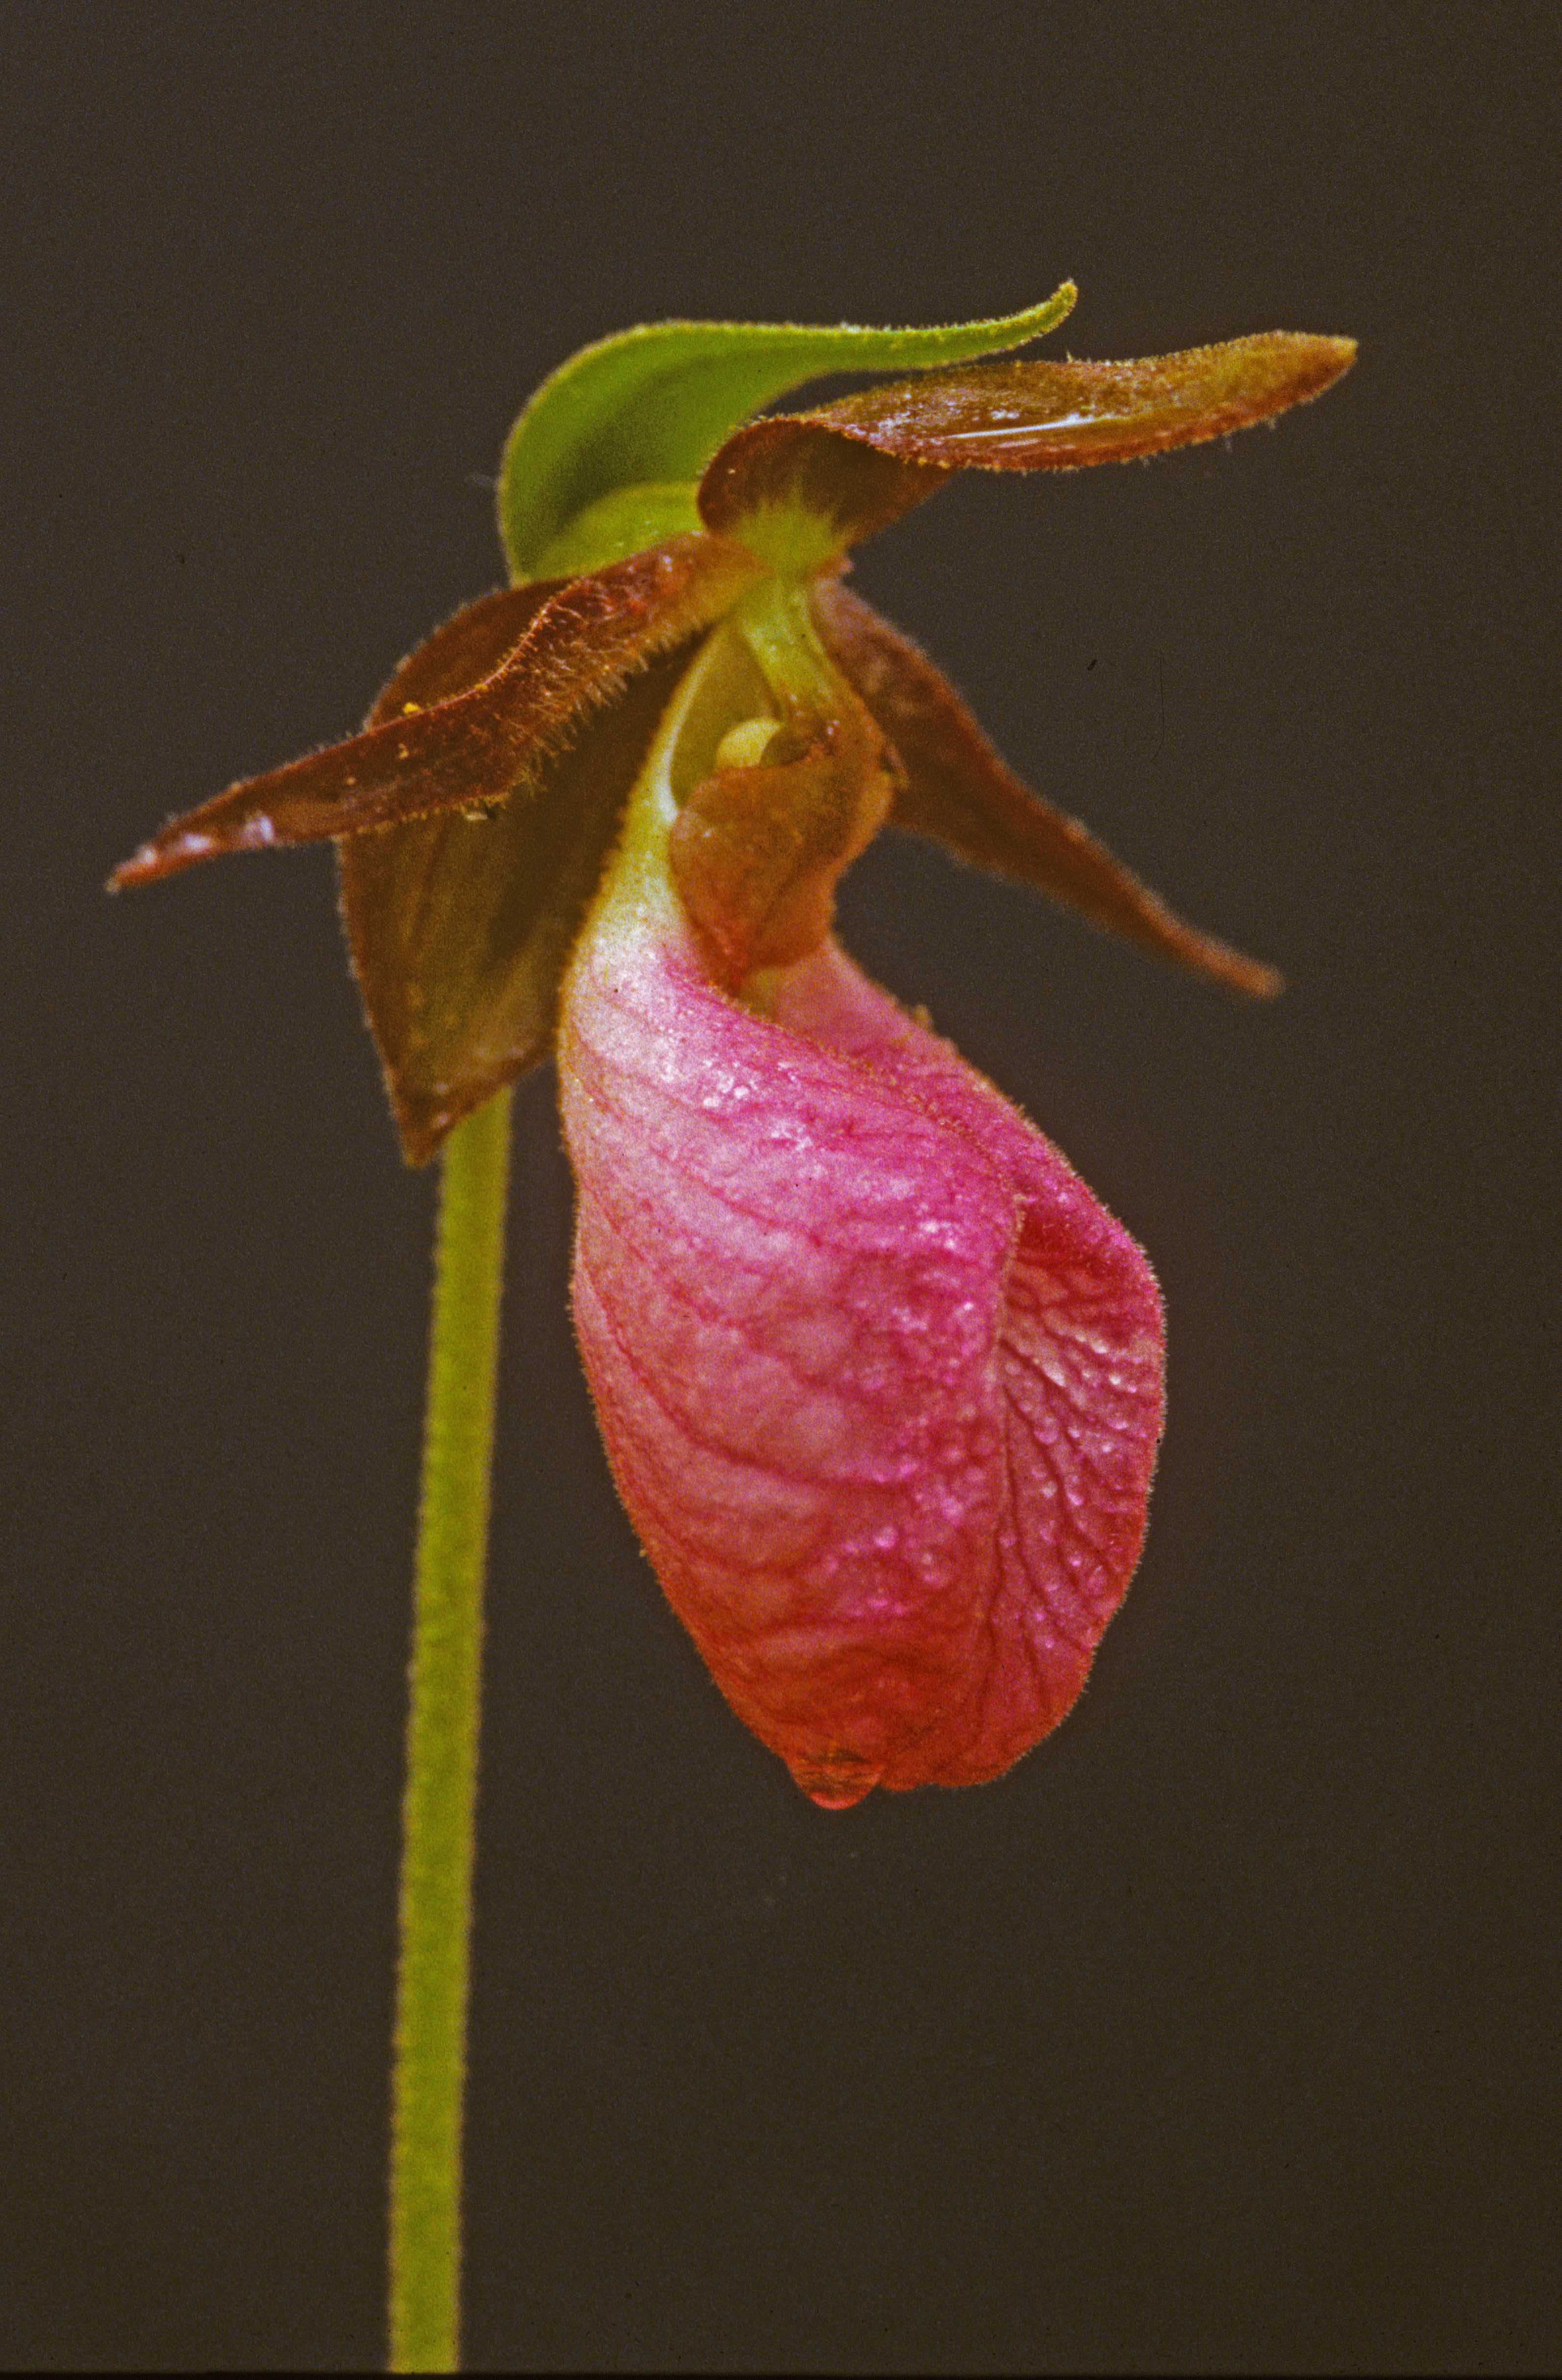 The Scientific Name is Cypripedium acaule. You will likely hear them called Pink Lady's-slipper, Stemless Lady's-slipper. This picture shows the  of Cypripedium acaule